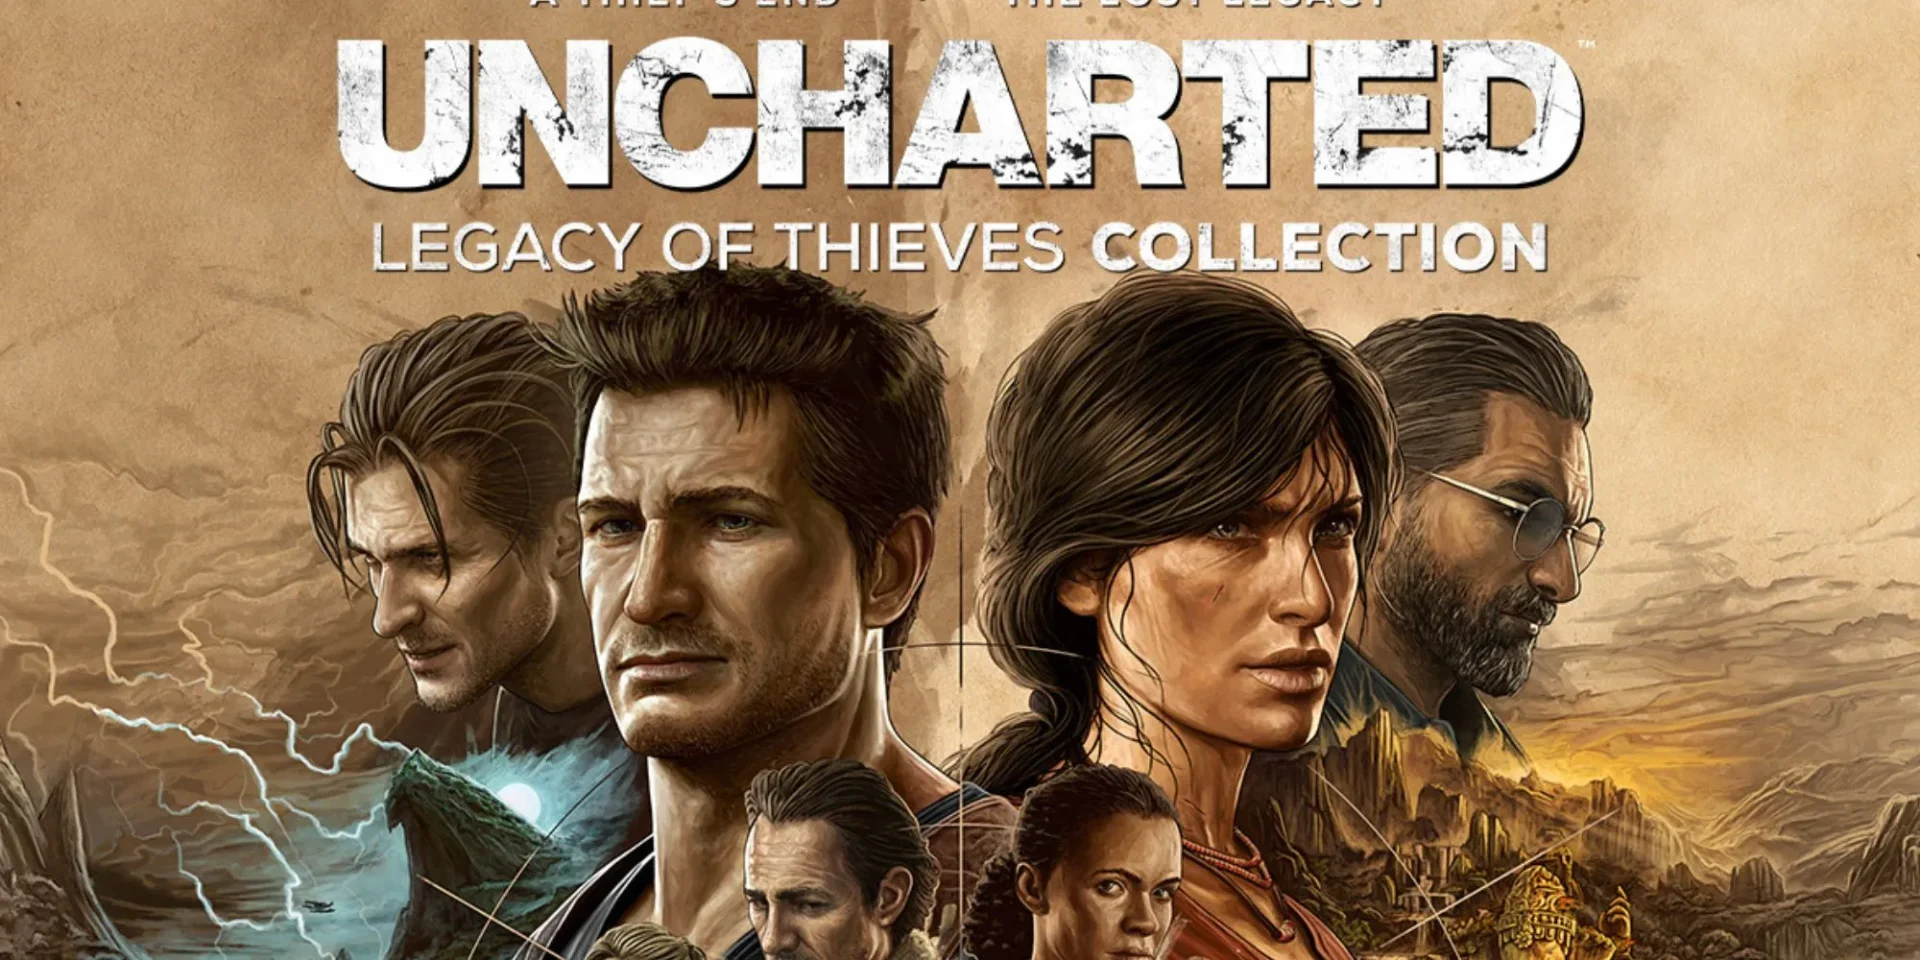 Legacy of thieves collection купить. Анчартед 5. Анчартед наследие воров. Uncharted 4 Legacy of Thieves. Игра Uncharted 5.